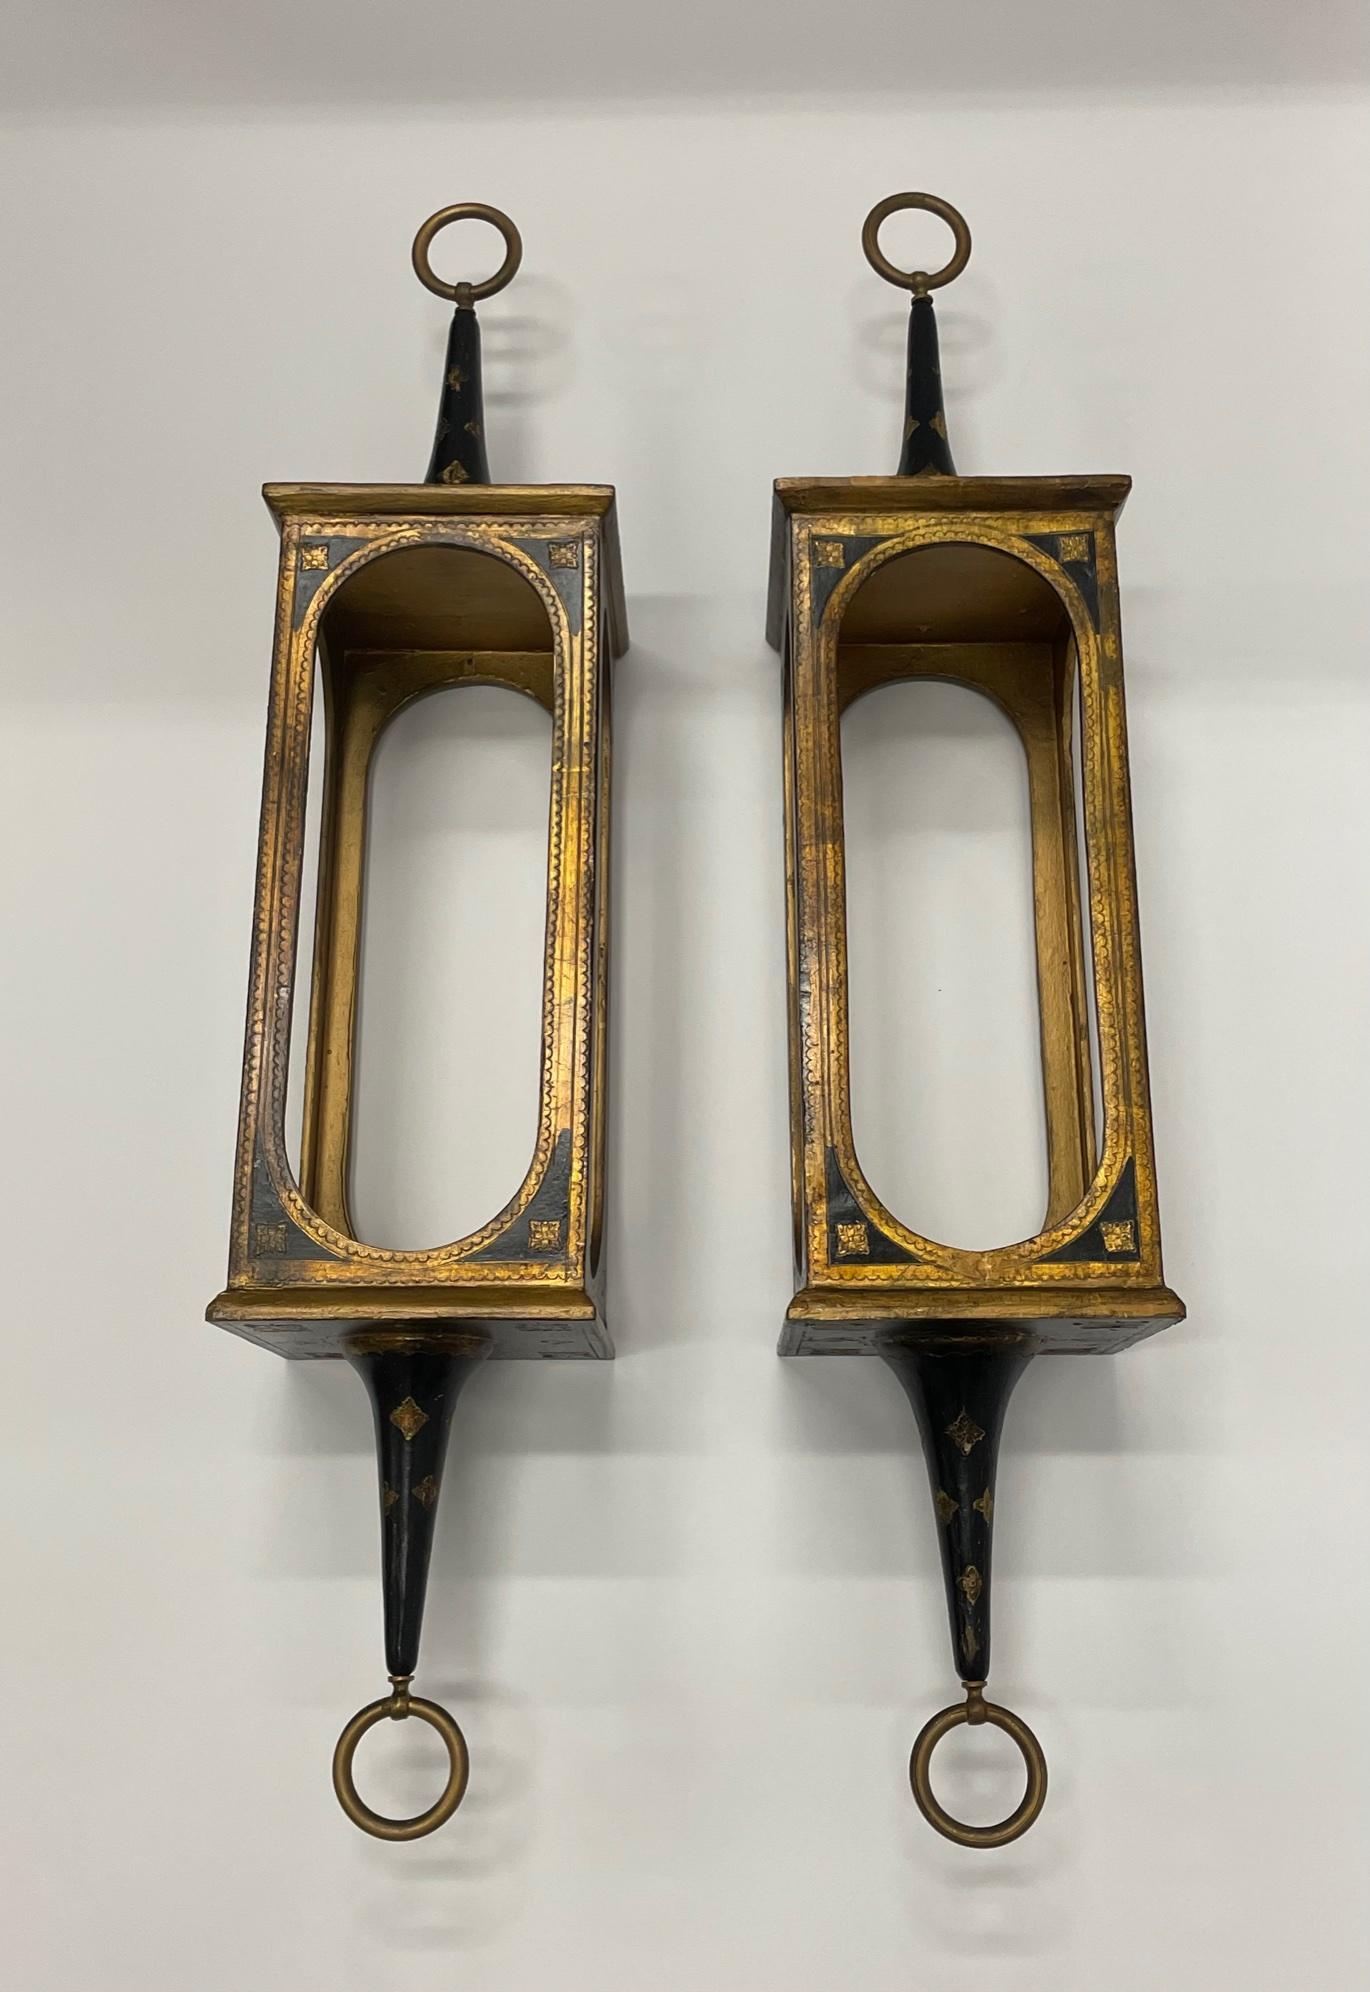 Romantic pair of hanging Venetian lanterns made of gilded and ebonized wood. Meant for candlelight.